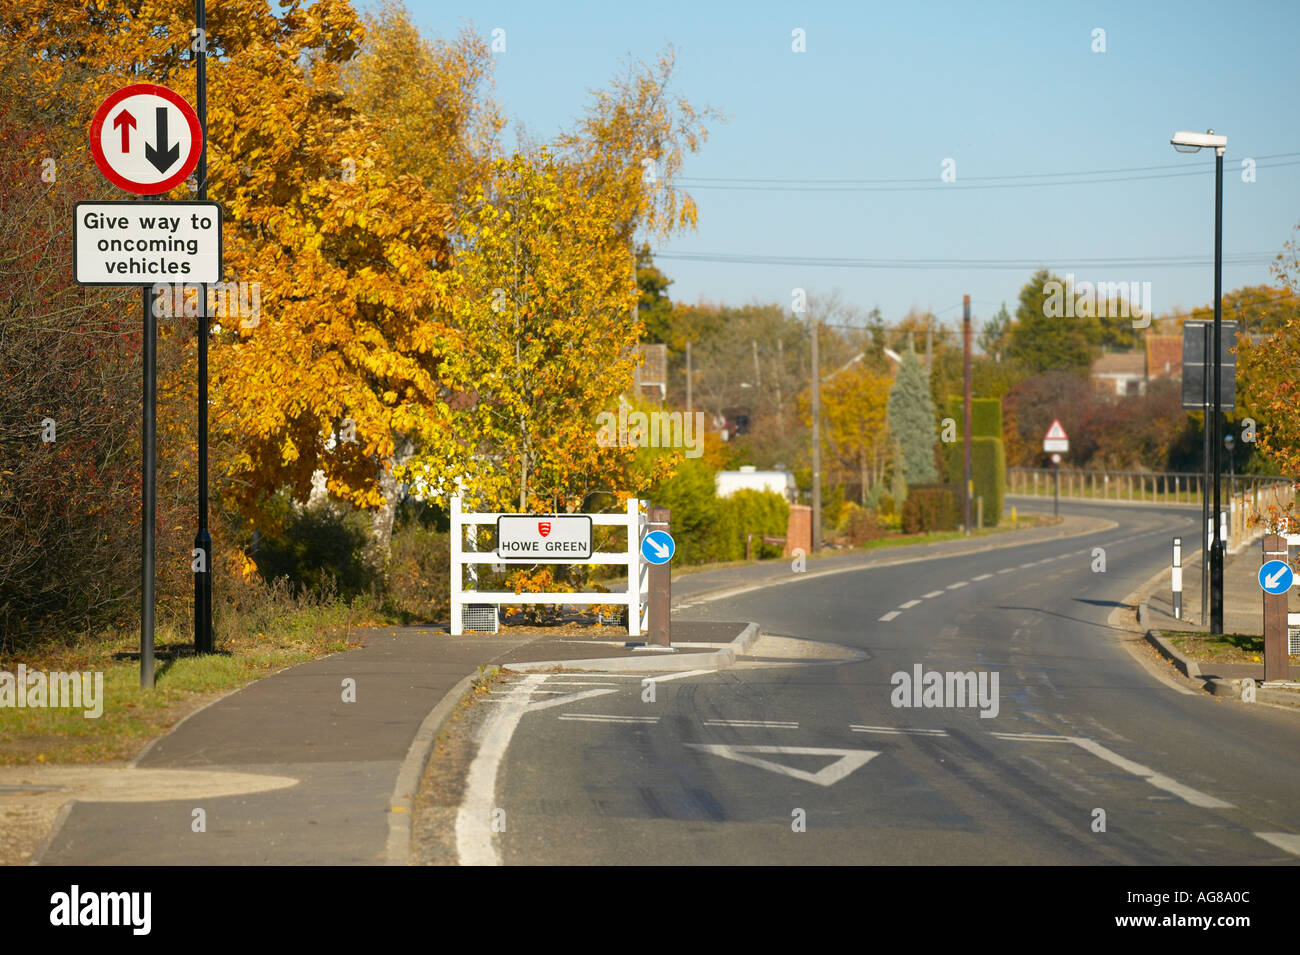 Traffic calming A130 Howe Green Chelmsford Essex Stock Photo